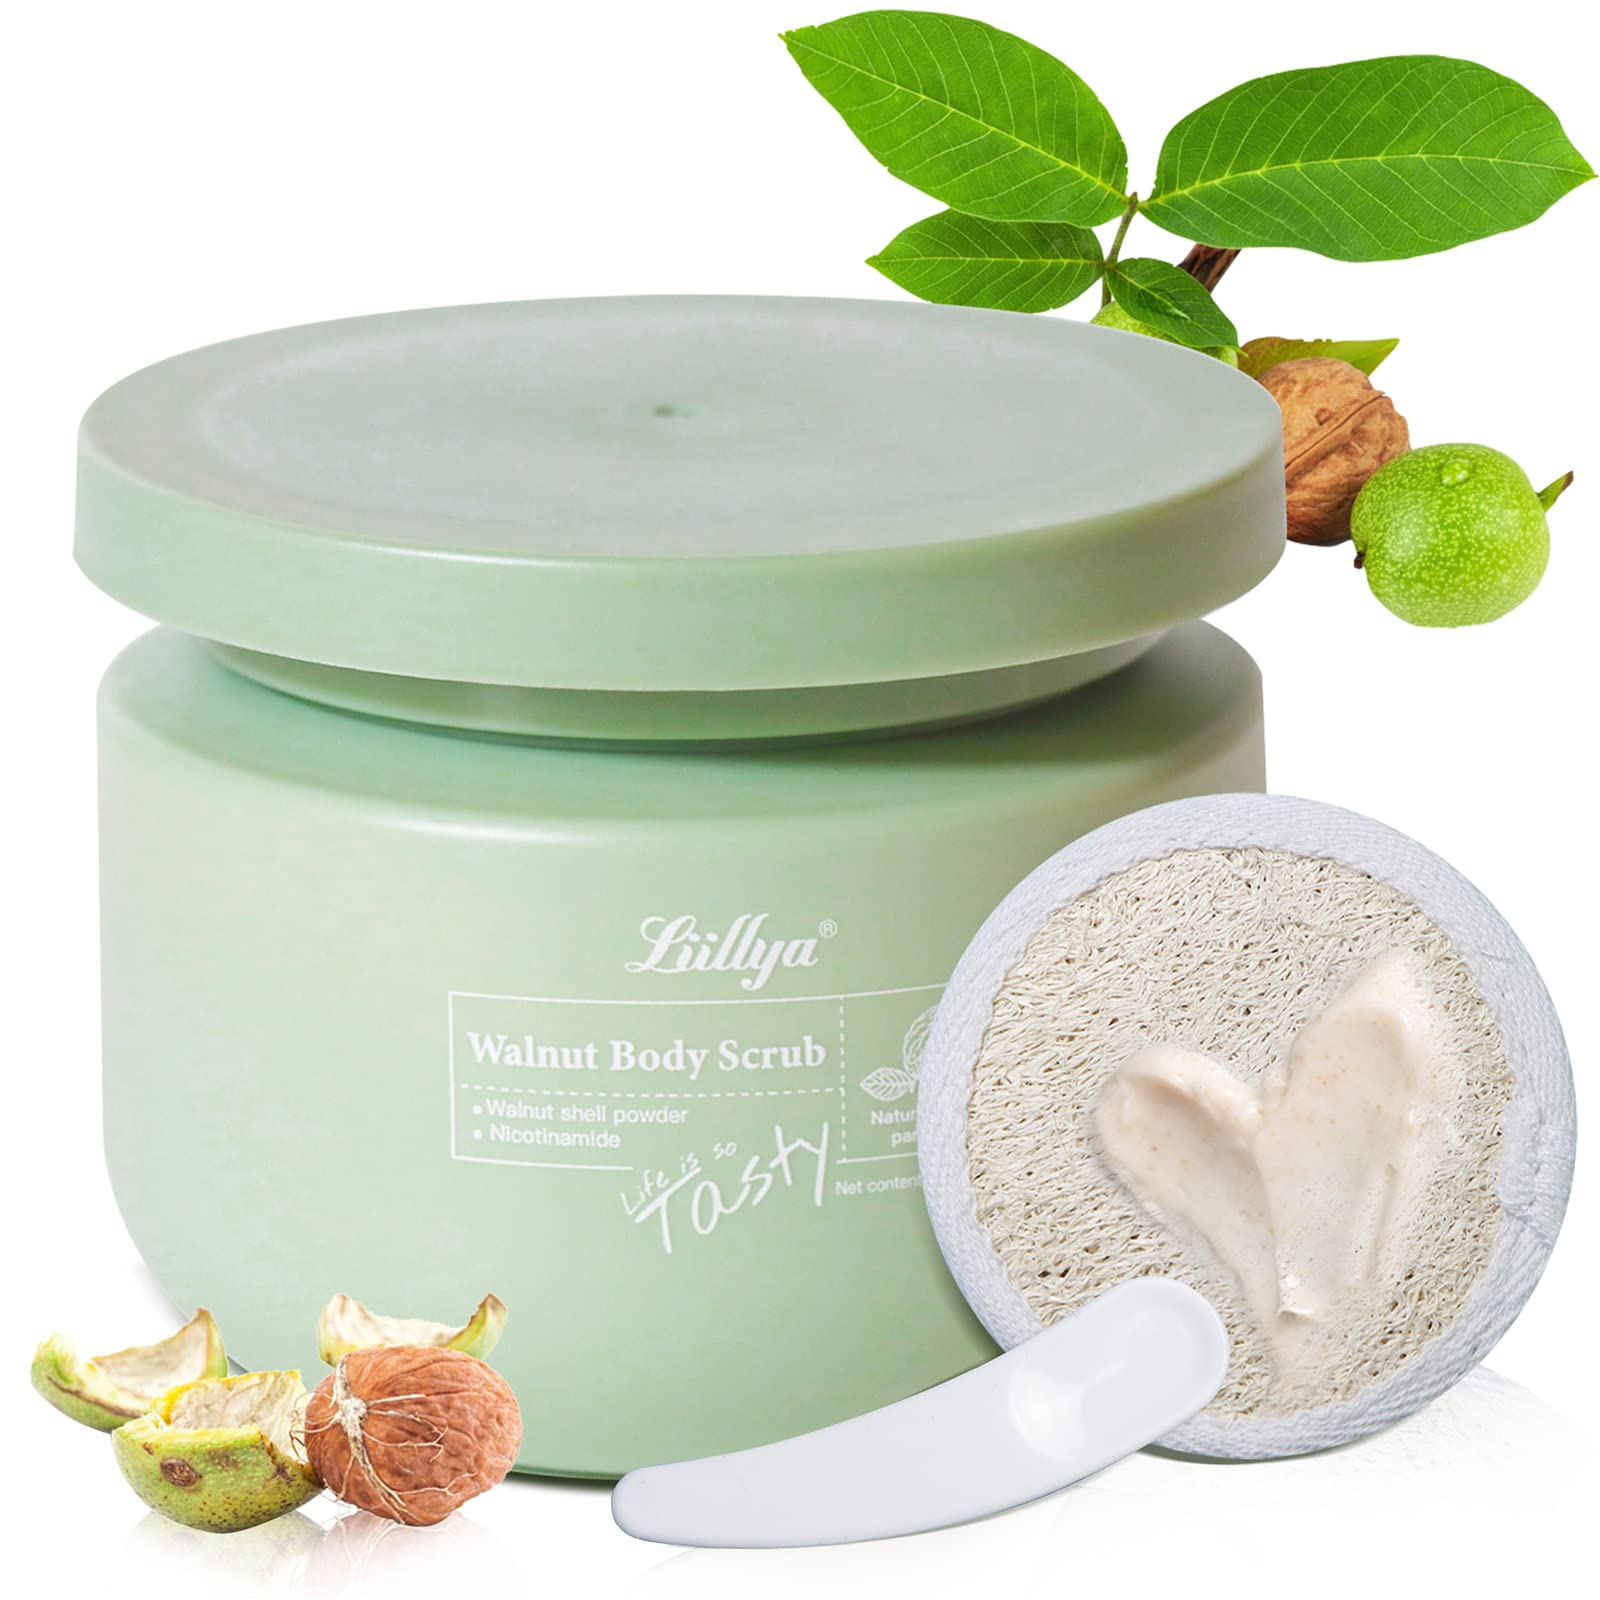 Liillya Walnut Body Scrub, Specially Increase with Niacinamide for Moisturizing, Pore Cleansing and Exfoliating, With Loofah and Scraping Spoon, 8 oz